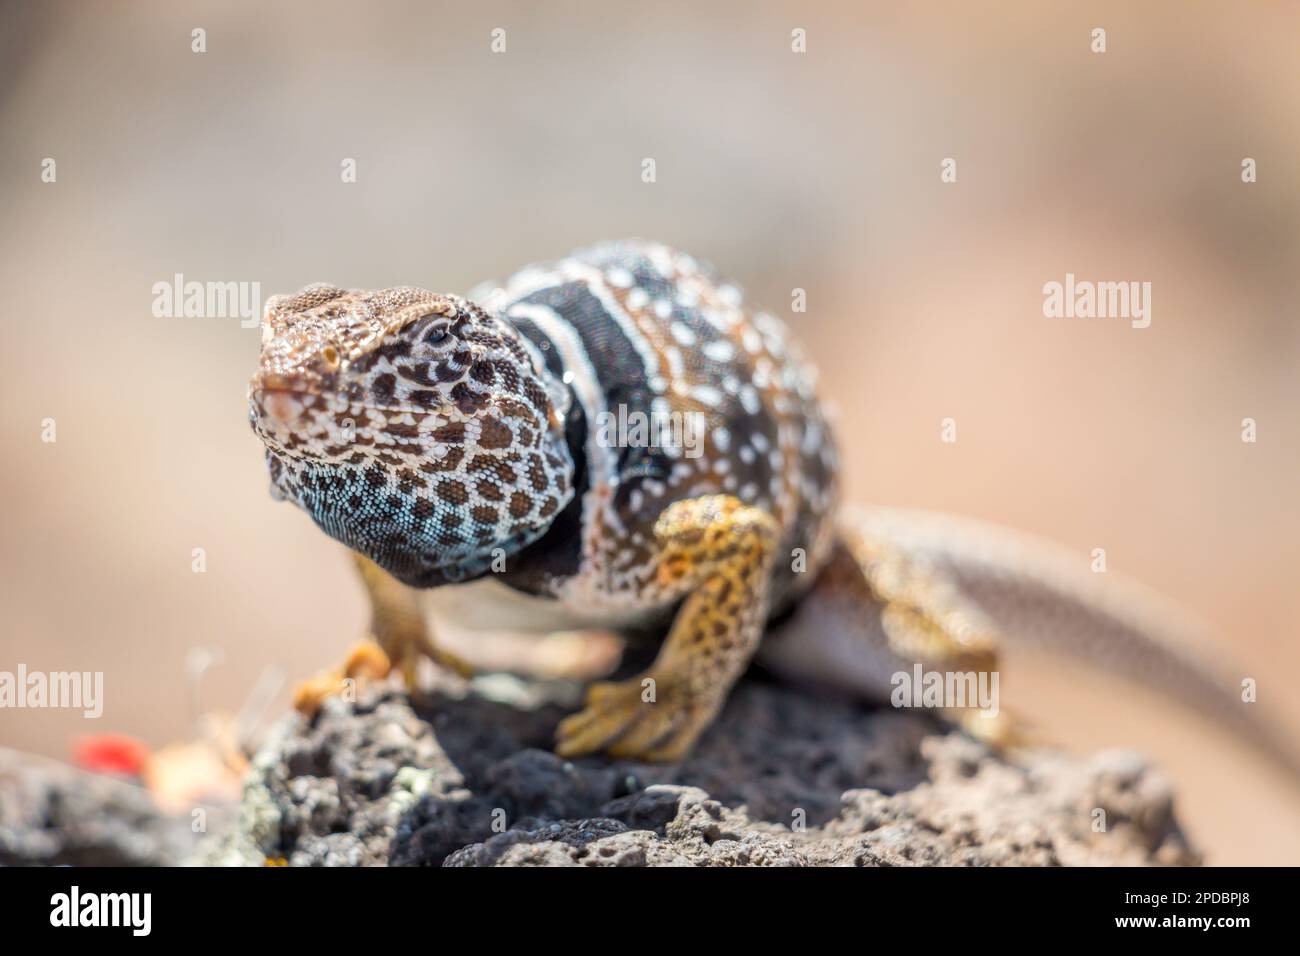 Close Up of Common Collared Lizard Standing on a Rock Stock Photo